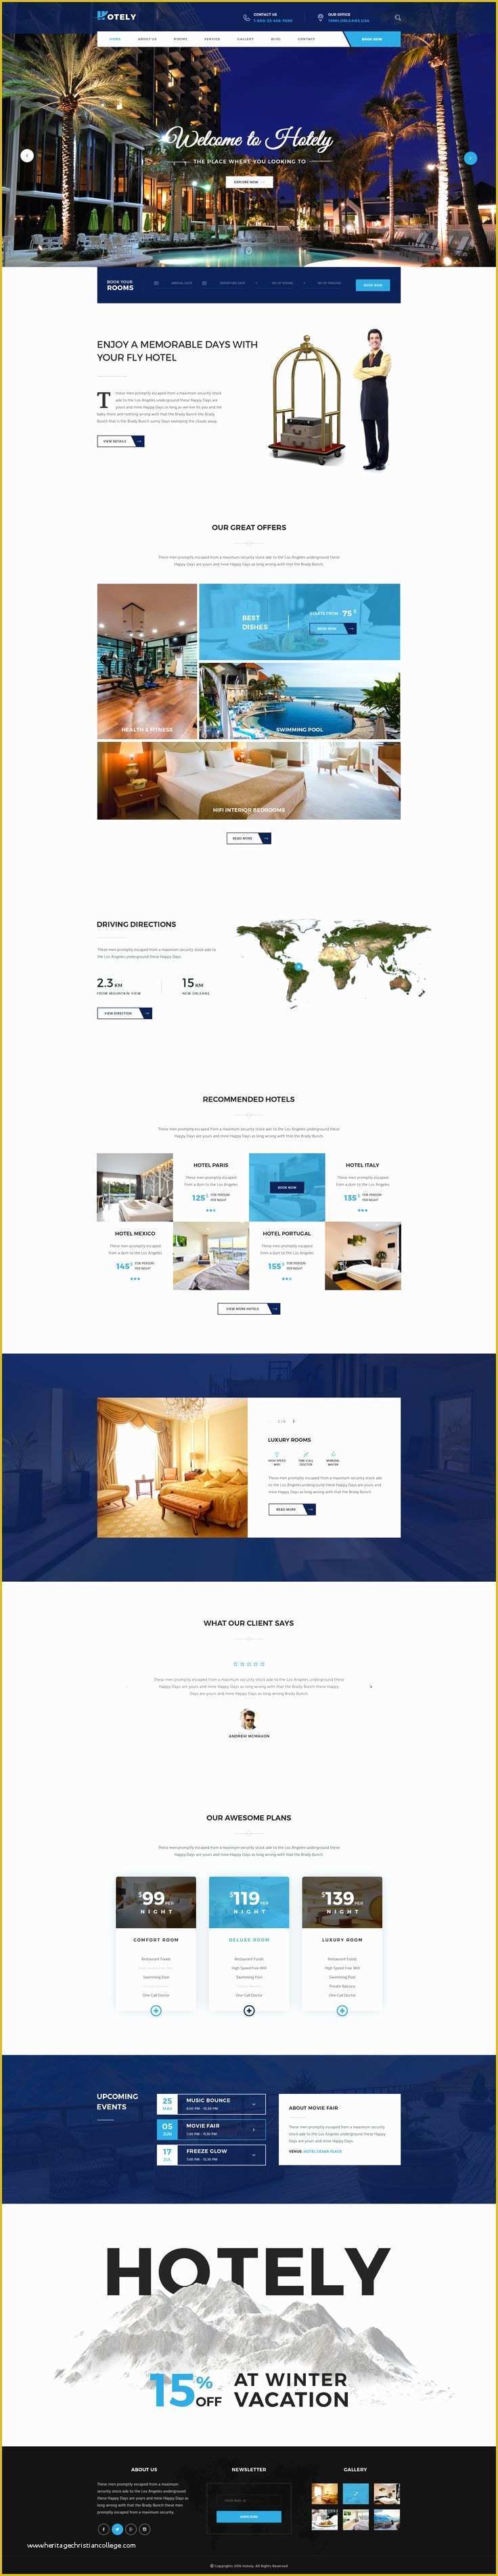 Travel Booking Website Templates Free Download Of 1000 Ideas About Travel Website Design On Pinterest